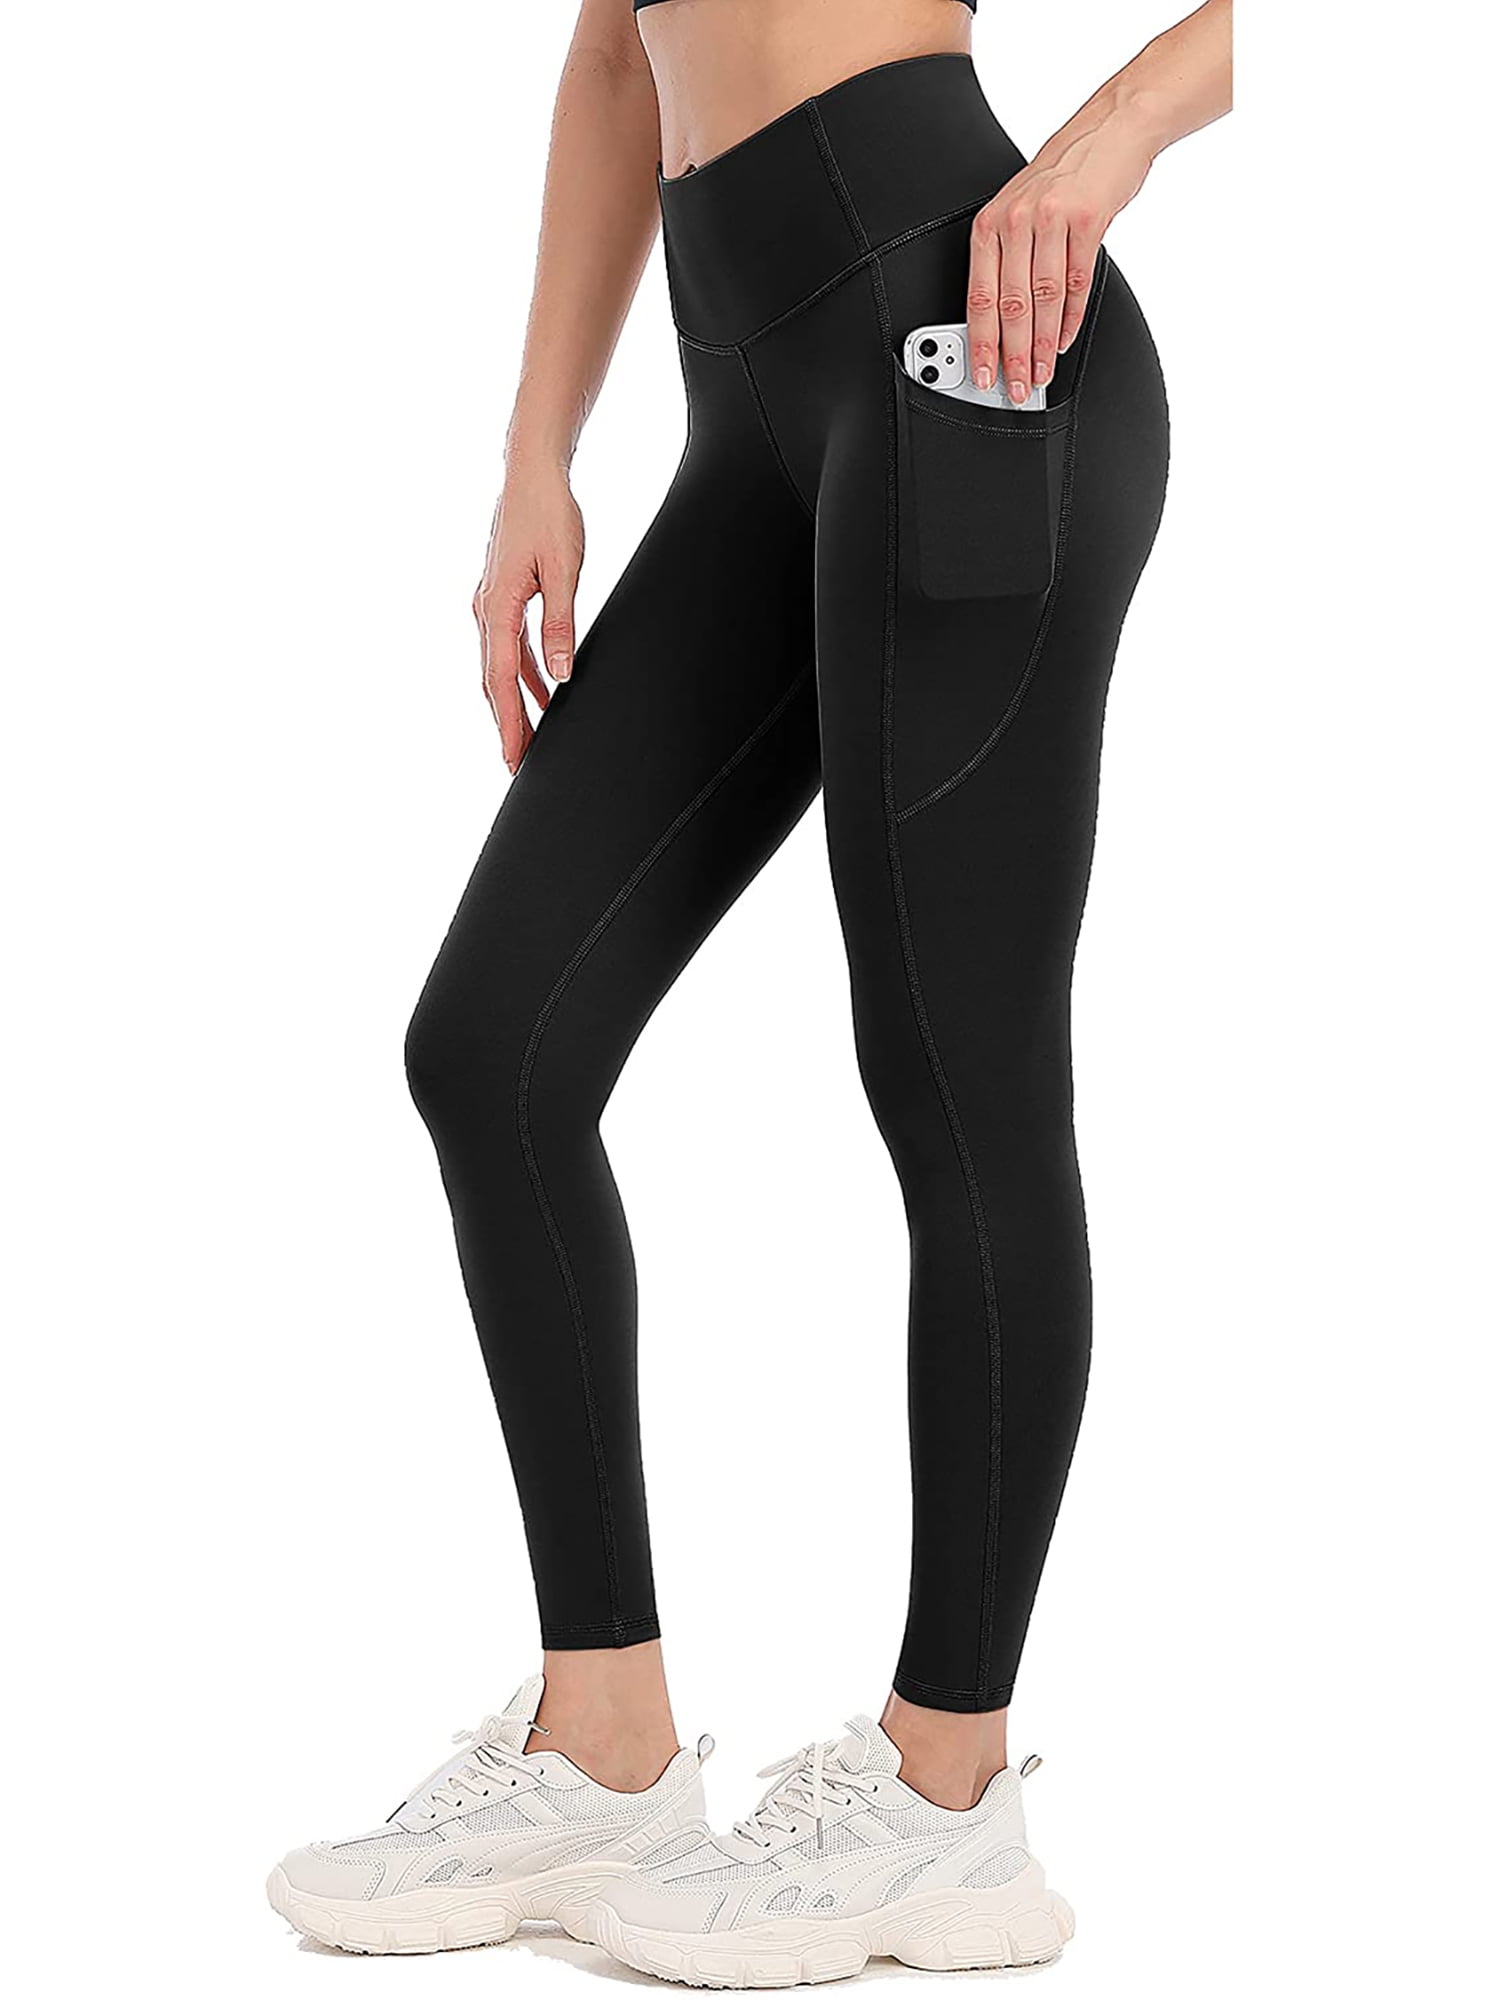 Update 121+ stretch leggings with pockets latest